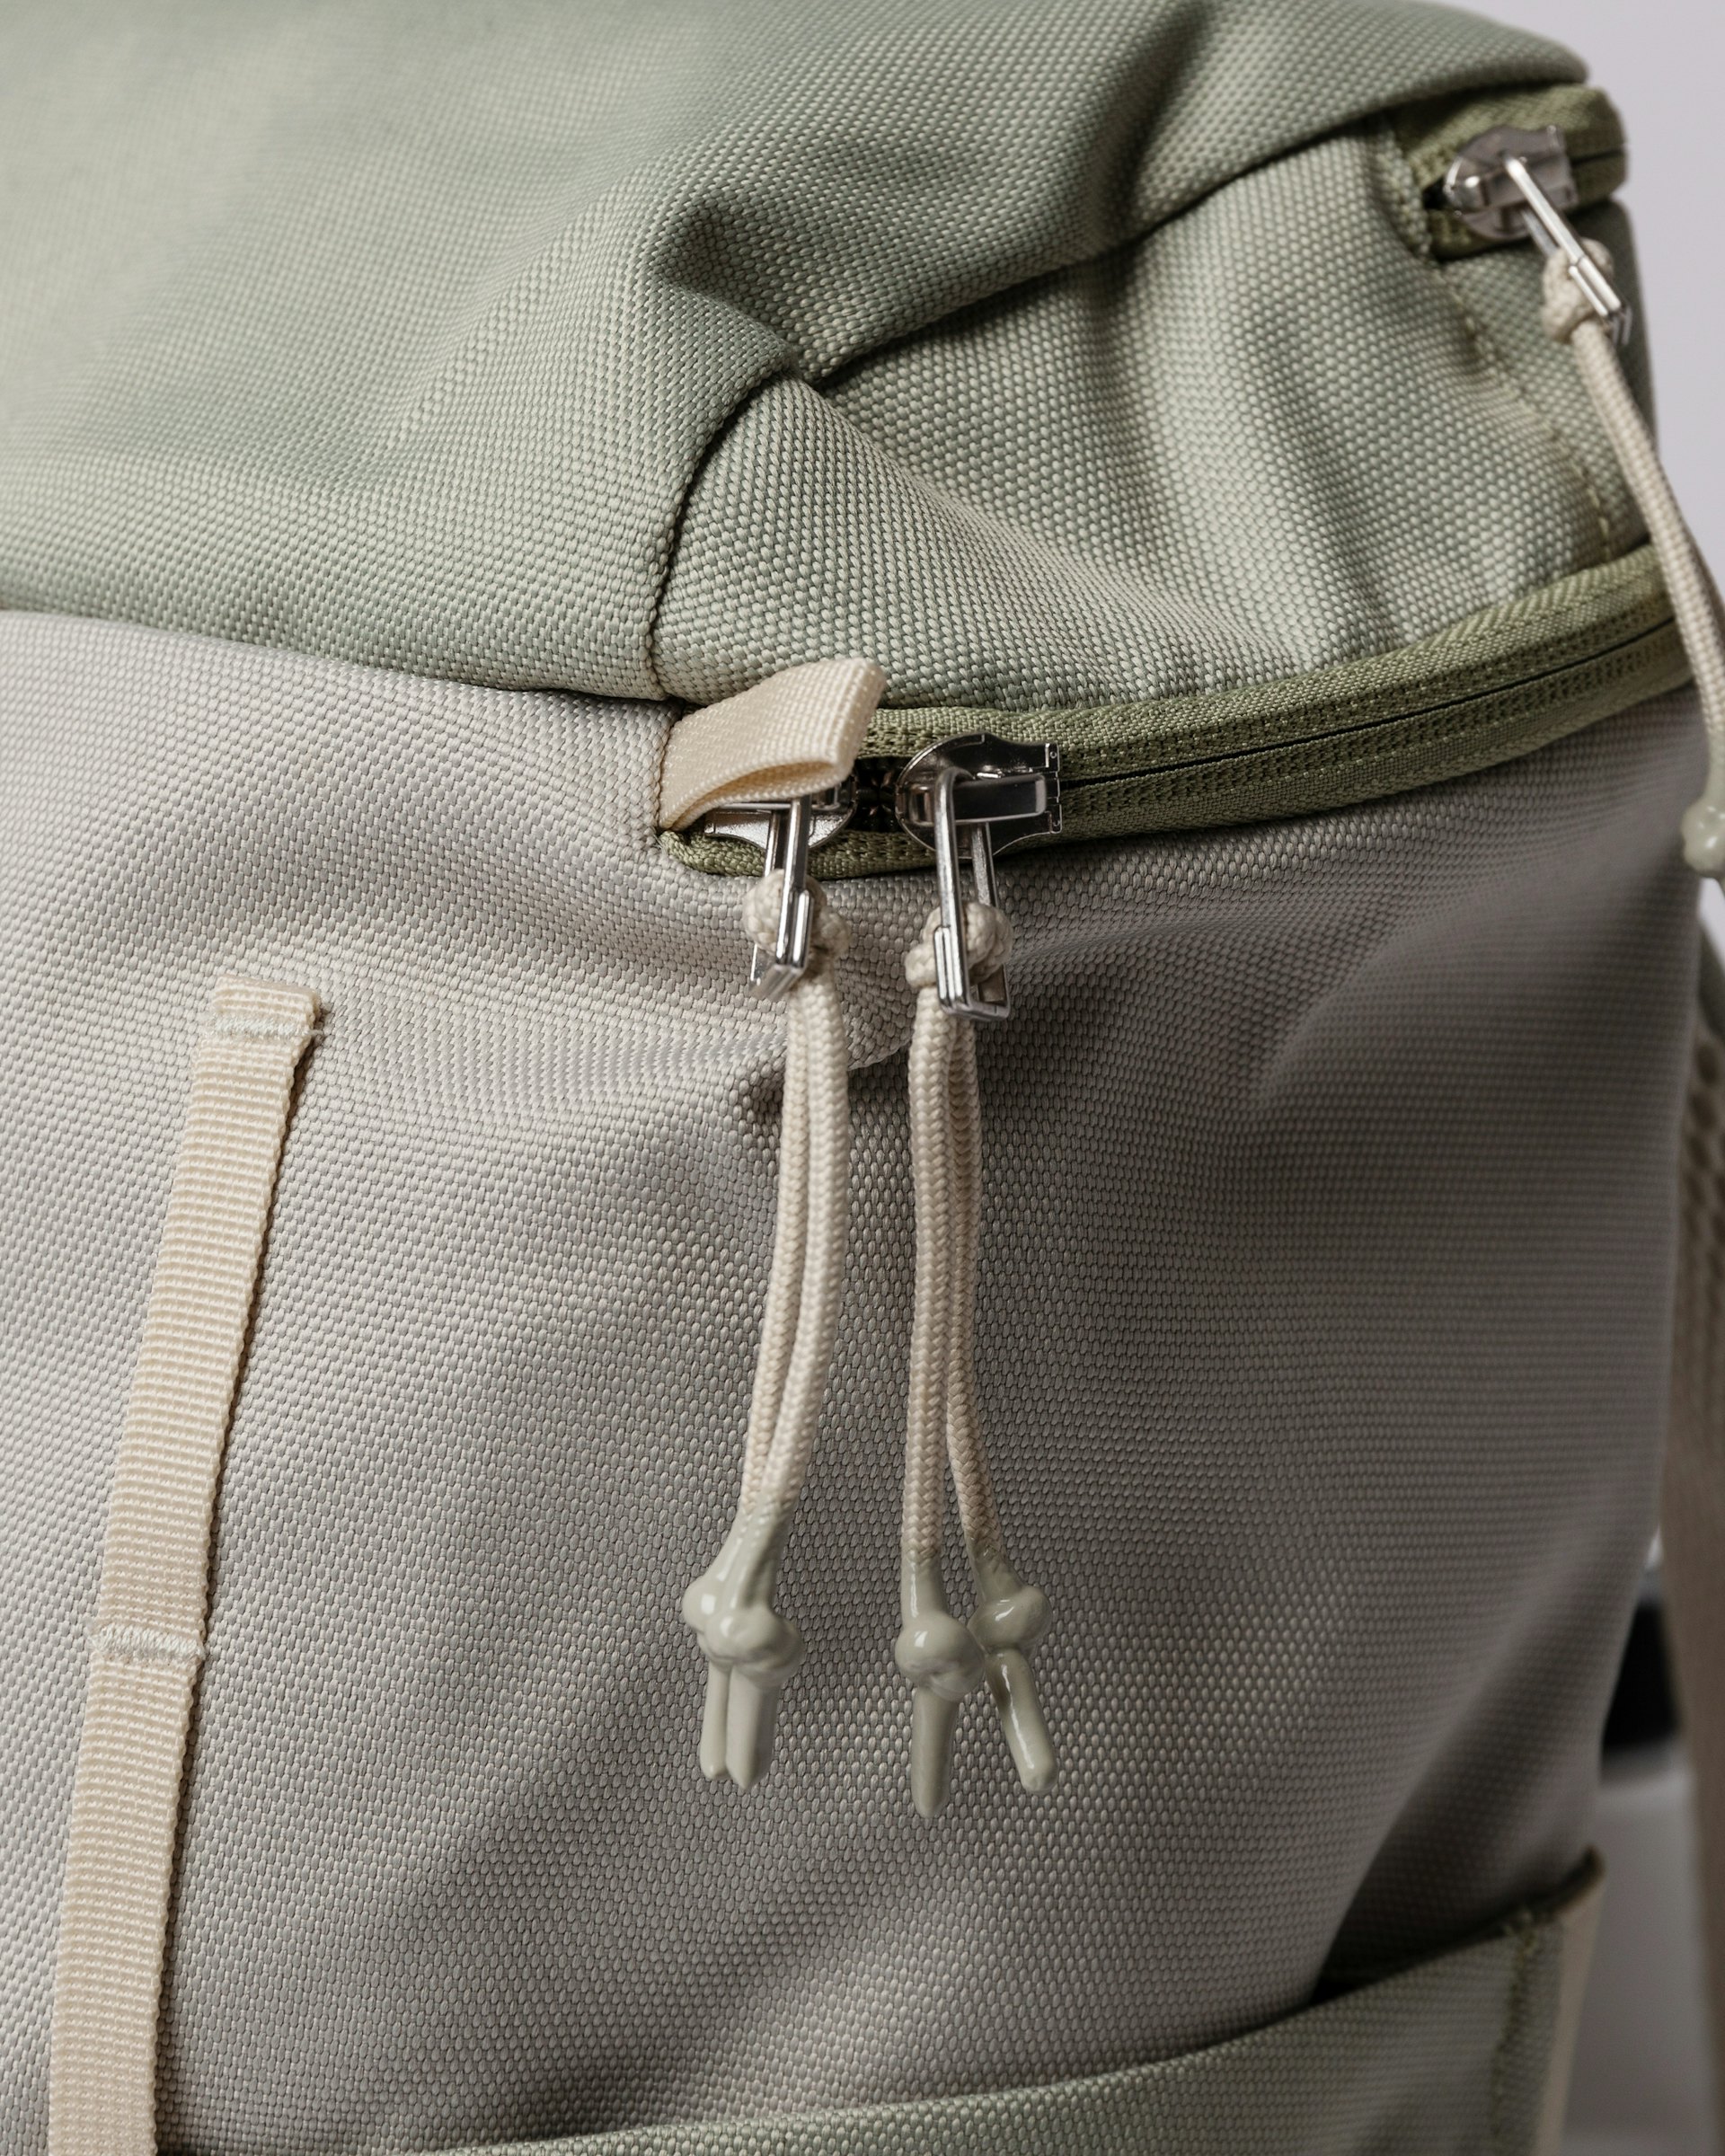 Sune belongs to the category Backpacks and is in color pale birch light & pale birch dark (6 of 7)